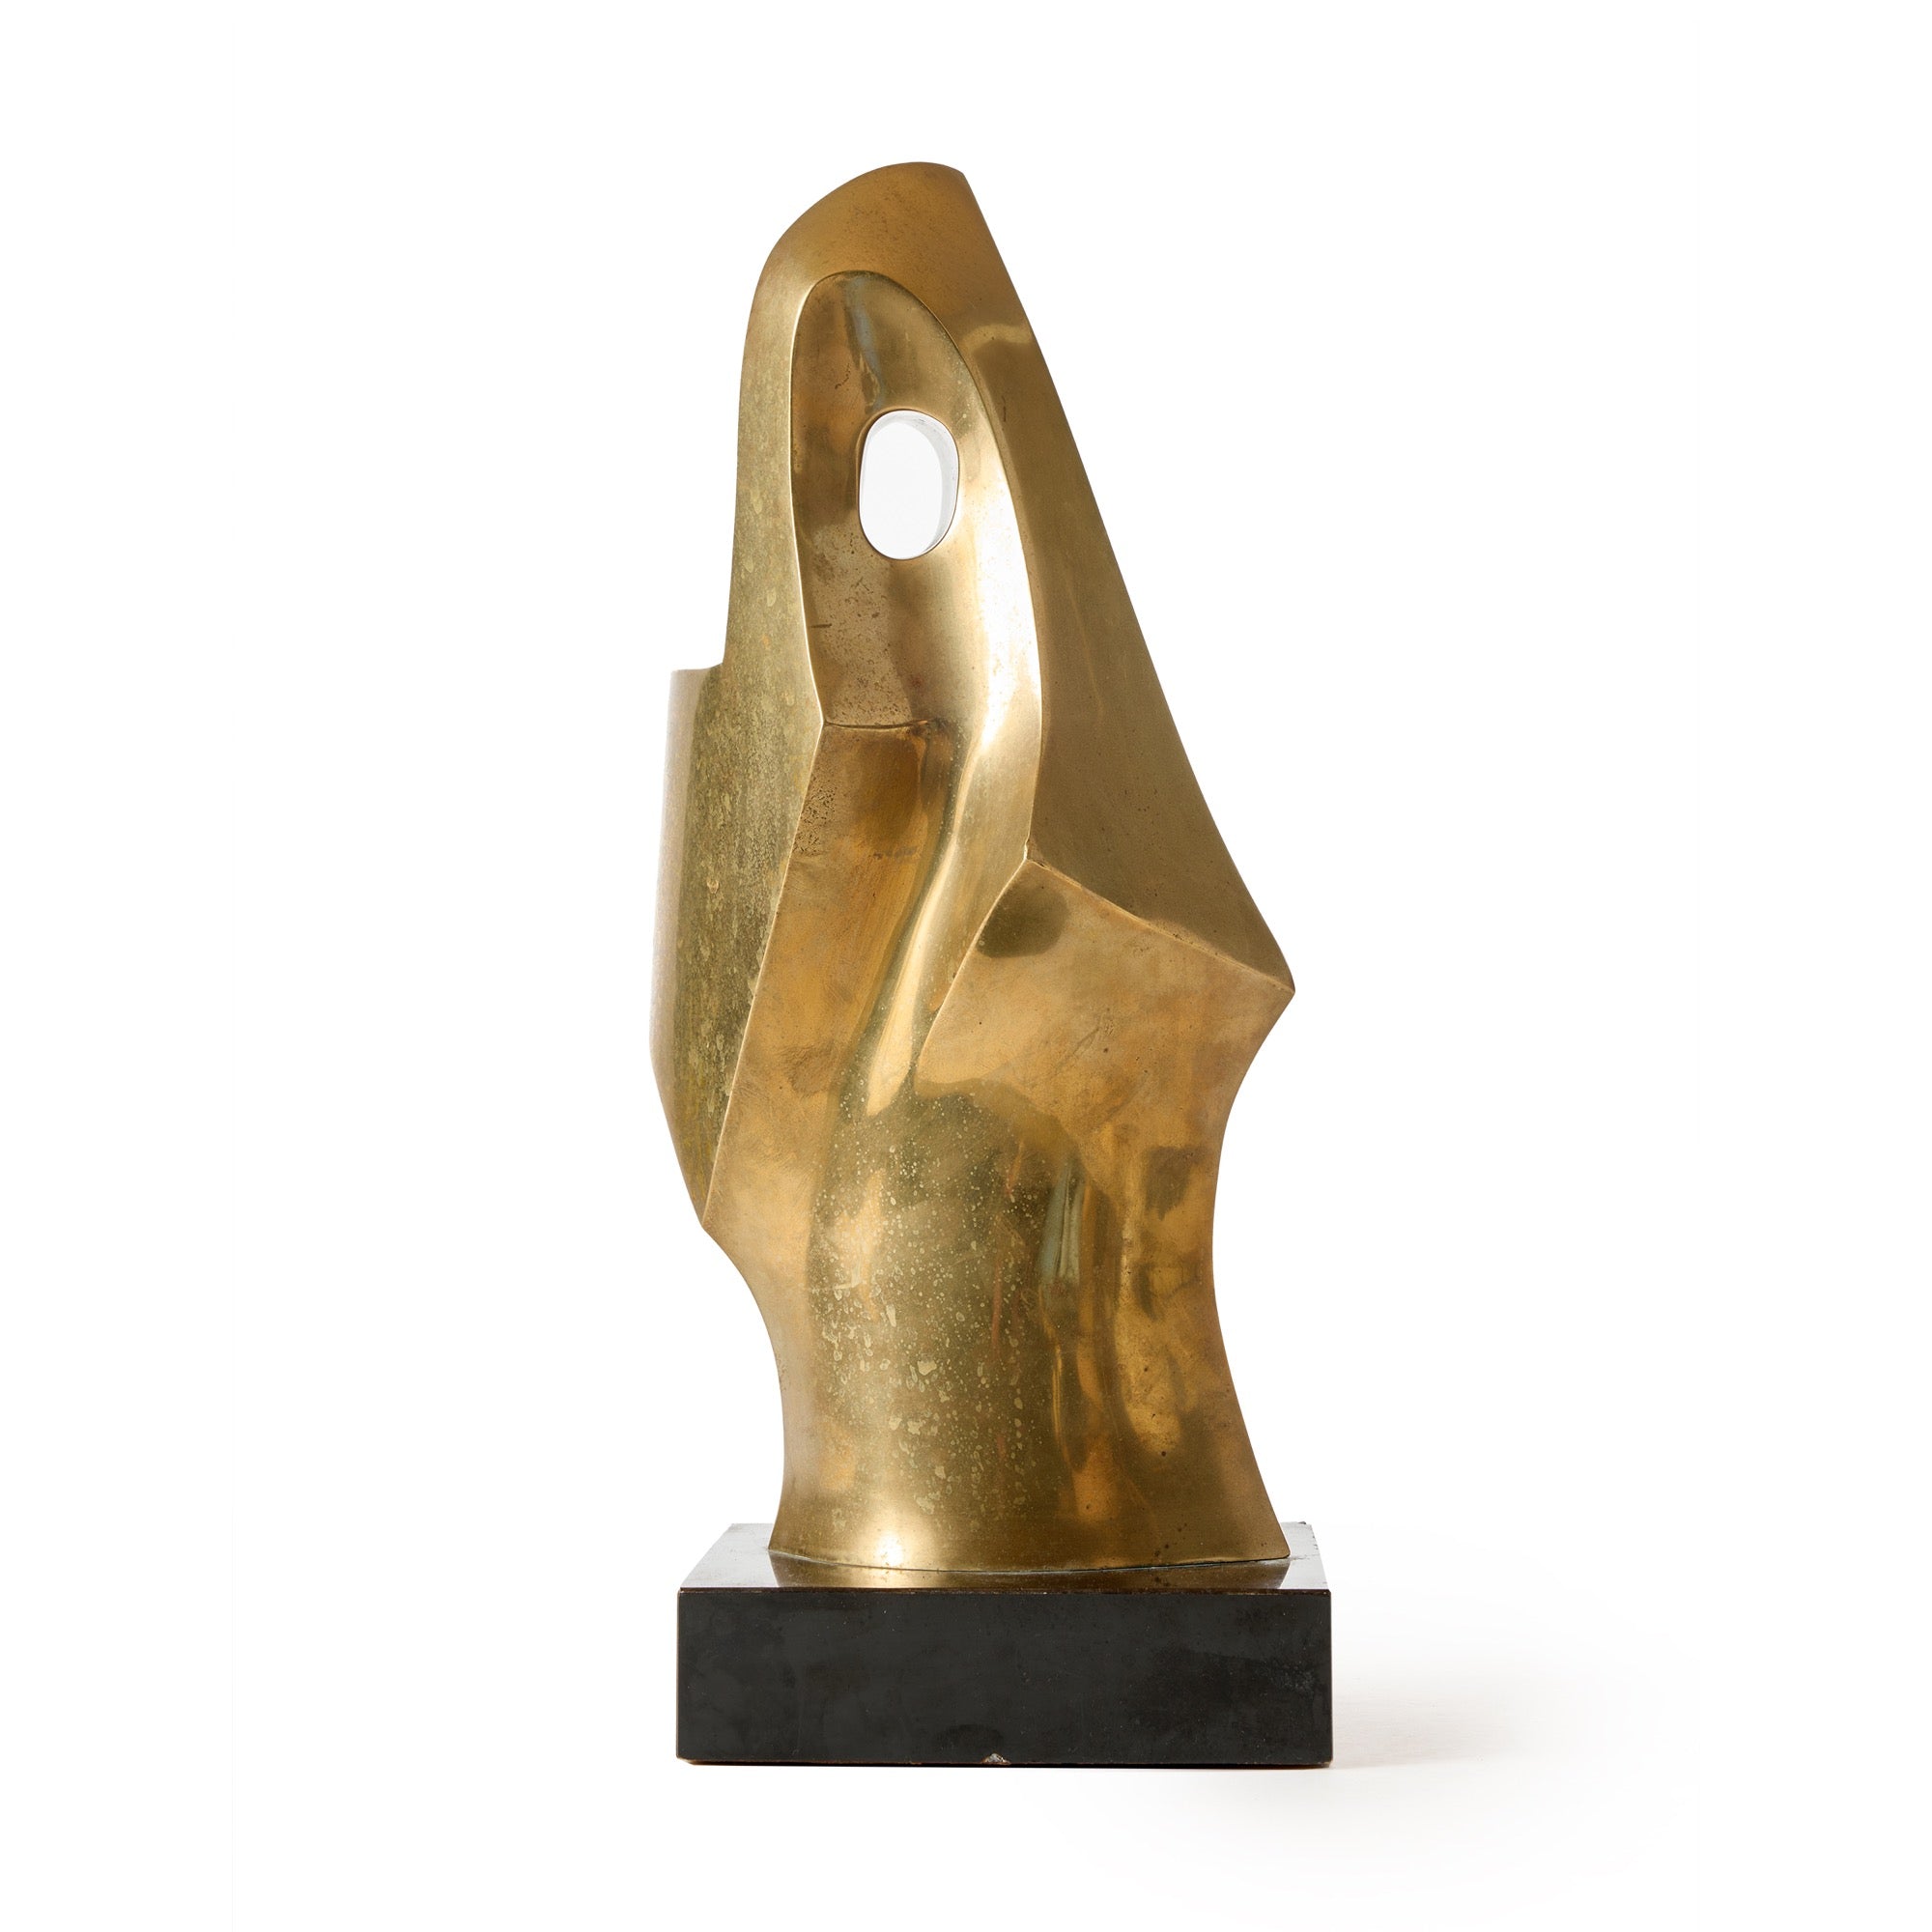 Abstract Bronze Sculpture by Seymour Meyer, 1960s - WYETH